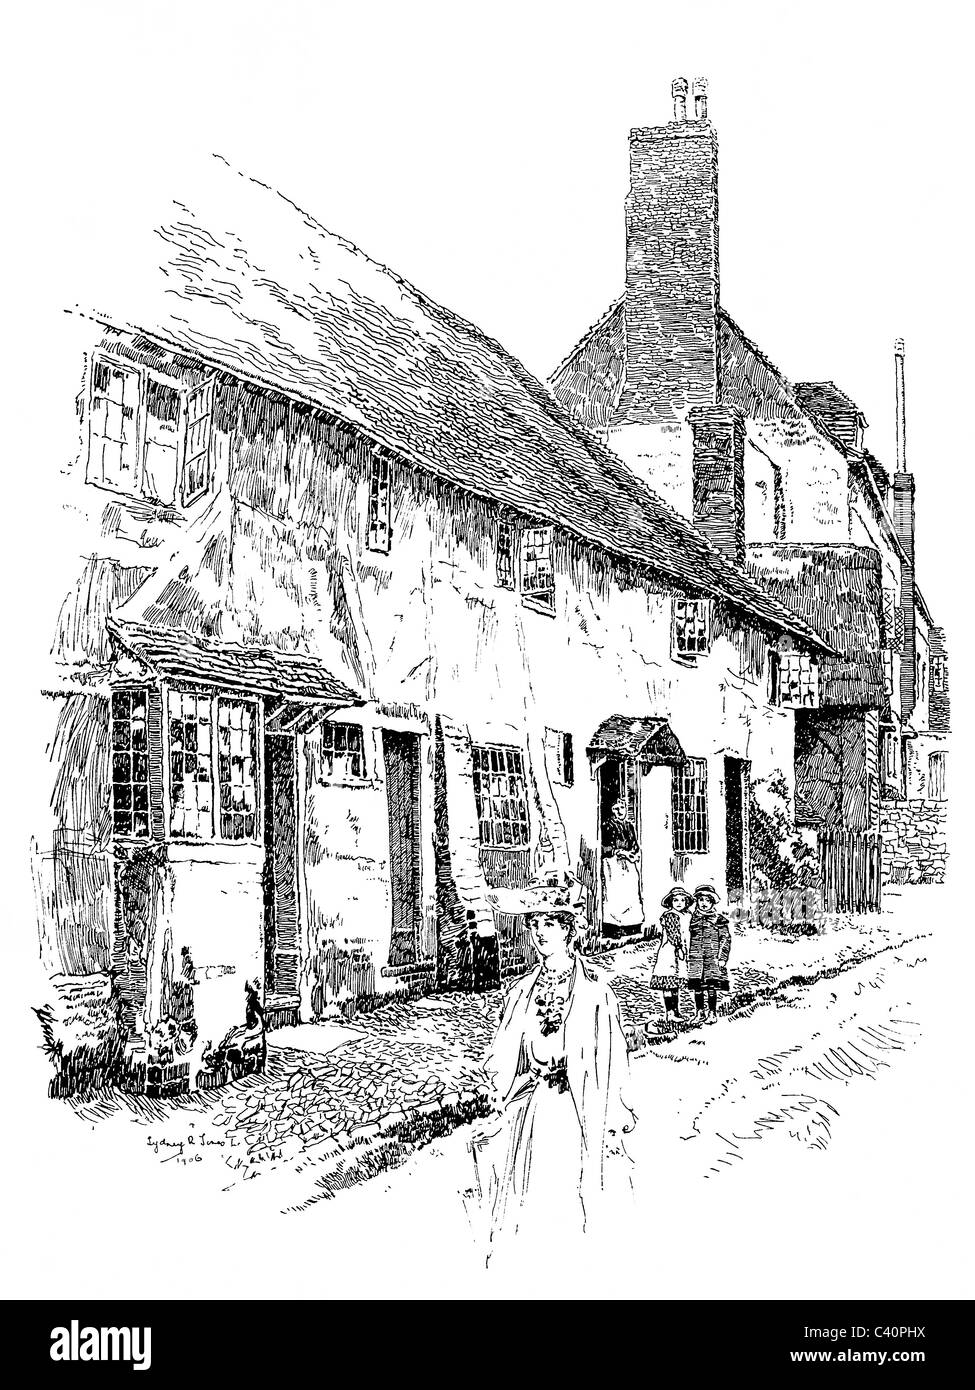 Petworth, Sussex - pen and ink illustration from 'Old English Country Cottages' by Charles Holme, 1906. Stock Photo